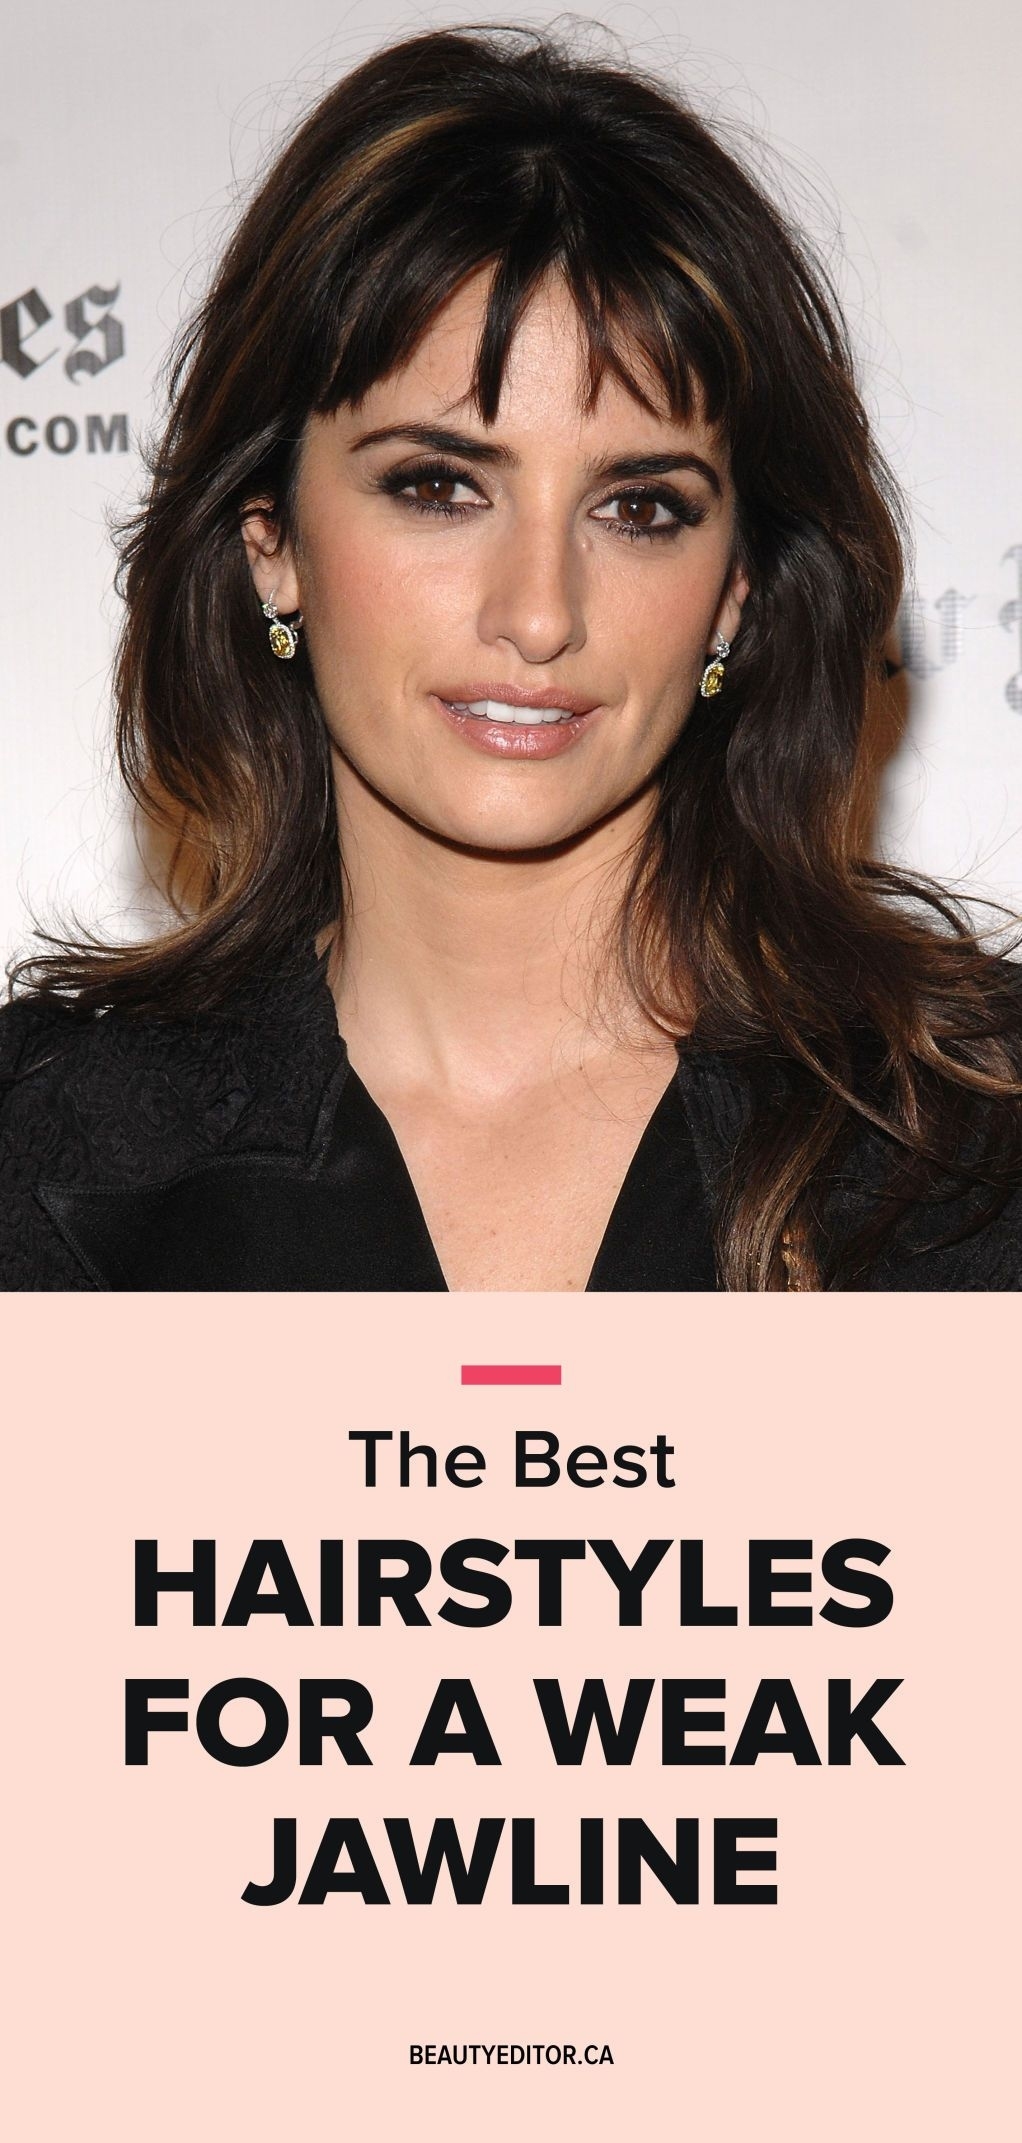 The Best Hairstyles For A Weak Jawline | Hair, Beauty in Best Hairstyle For Weak Chins